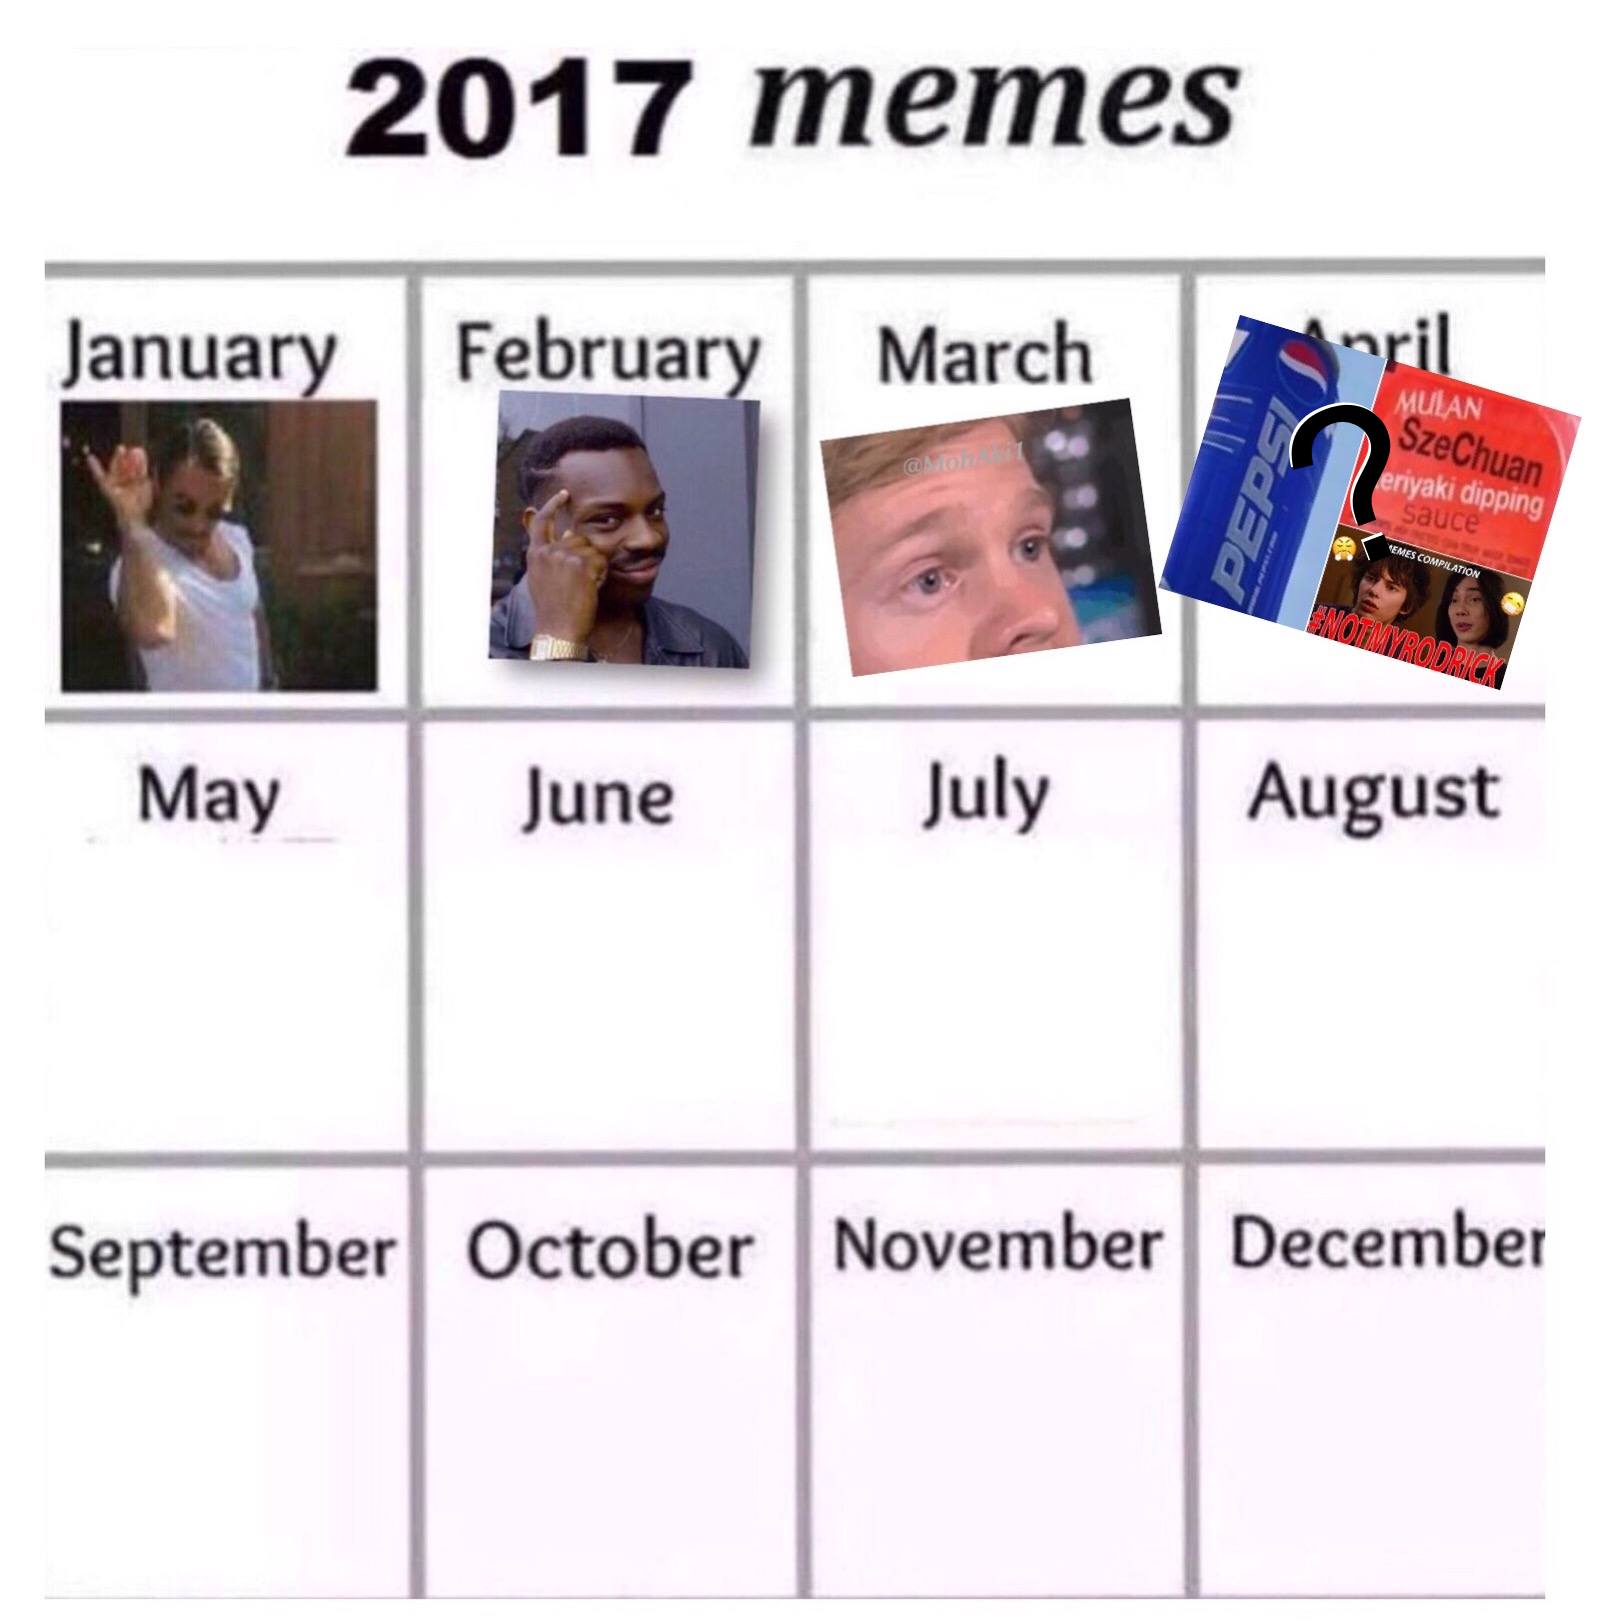 memes of every month 2017 - 2017 memes January February March huan ya dipping May June July August September October November December